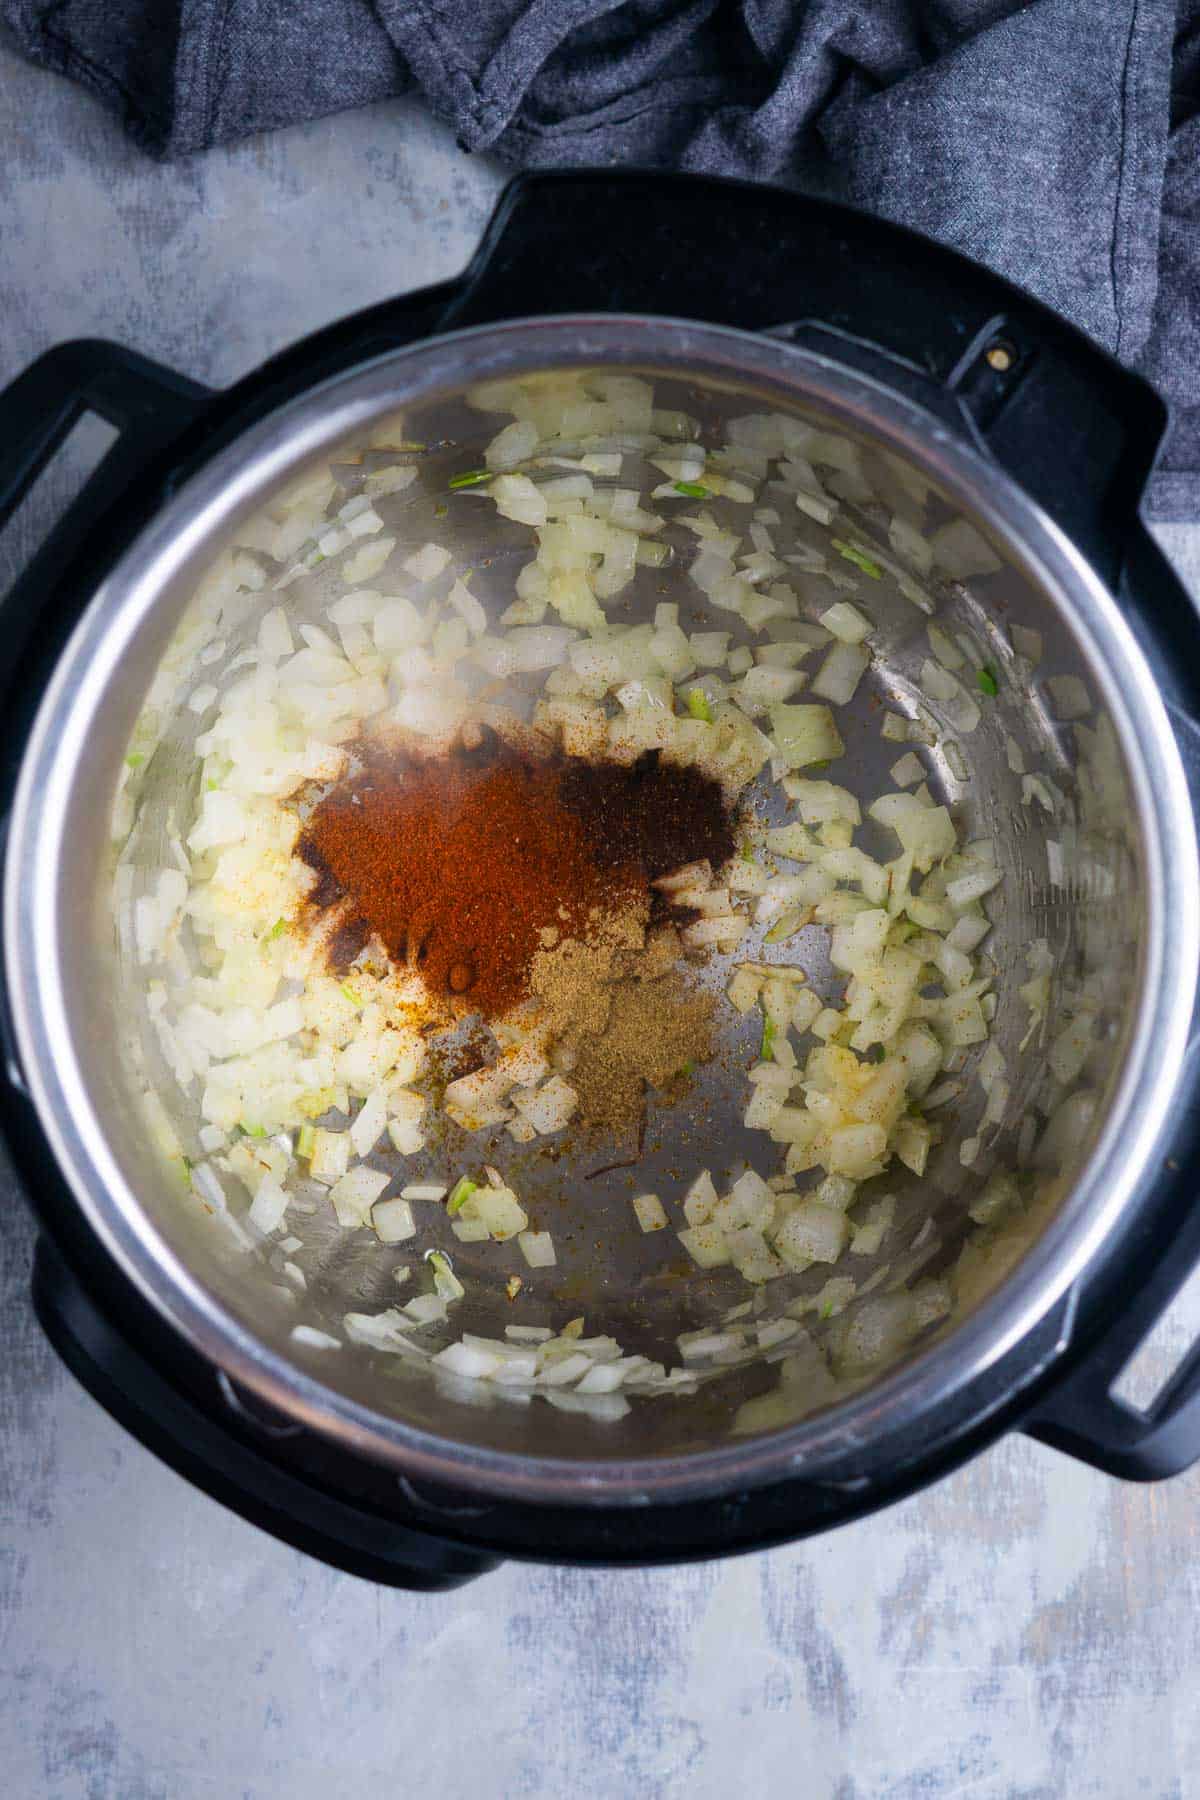 Onions and seasonings are sautéing in the instant pot for sweet potato chili